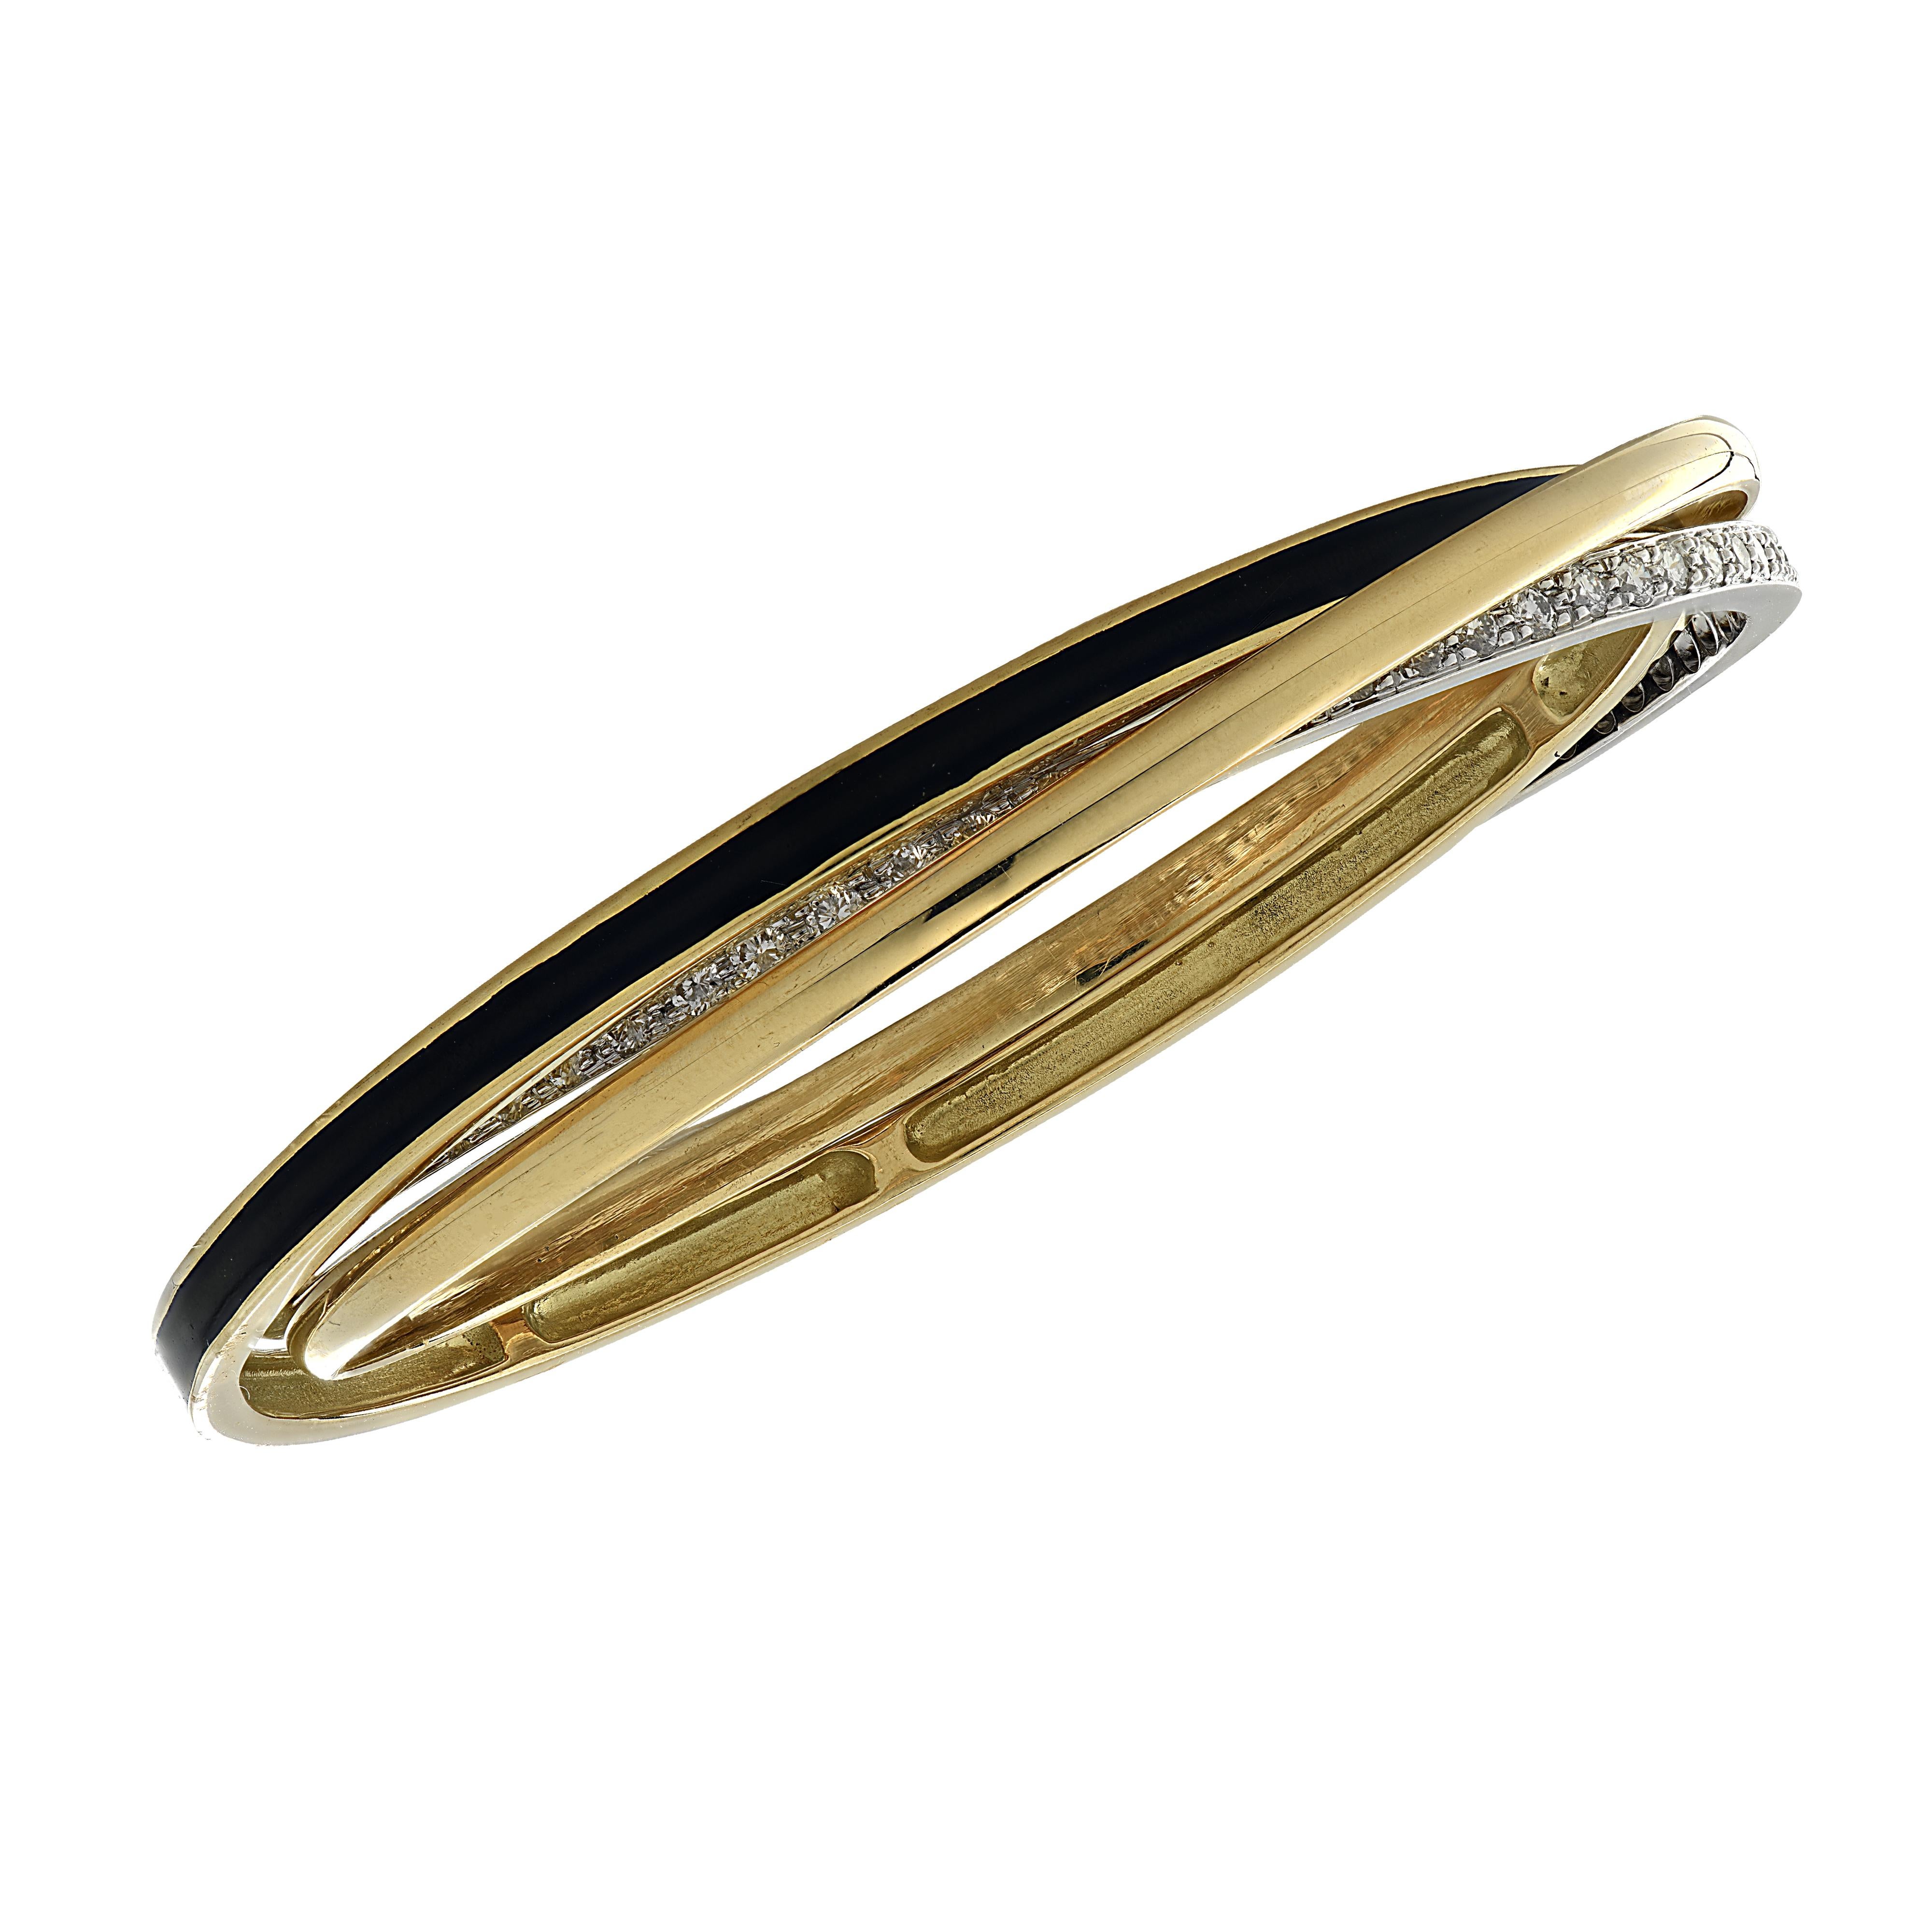 Stunning 3 row bangle crafted in 18 karat yellow and white gold and black enamel, featuring 68 round brilliant cut diamonds weighing approximately 3 carats total, G color, VS clarity. Three bangles, one yellow gold, one yellow gold embellished with